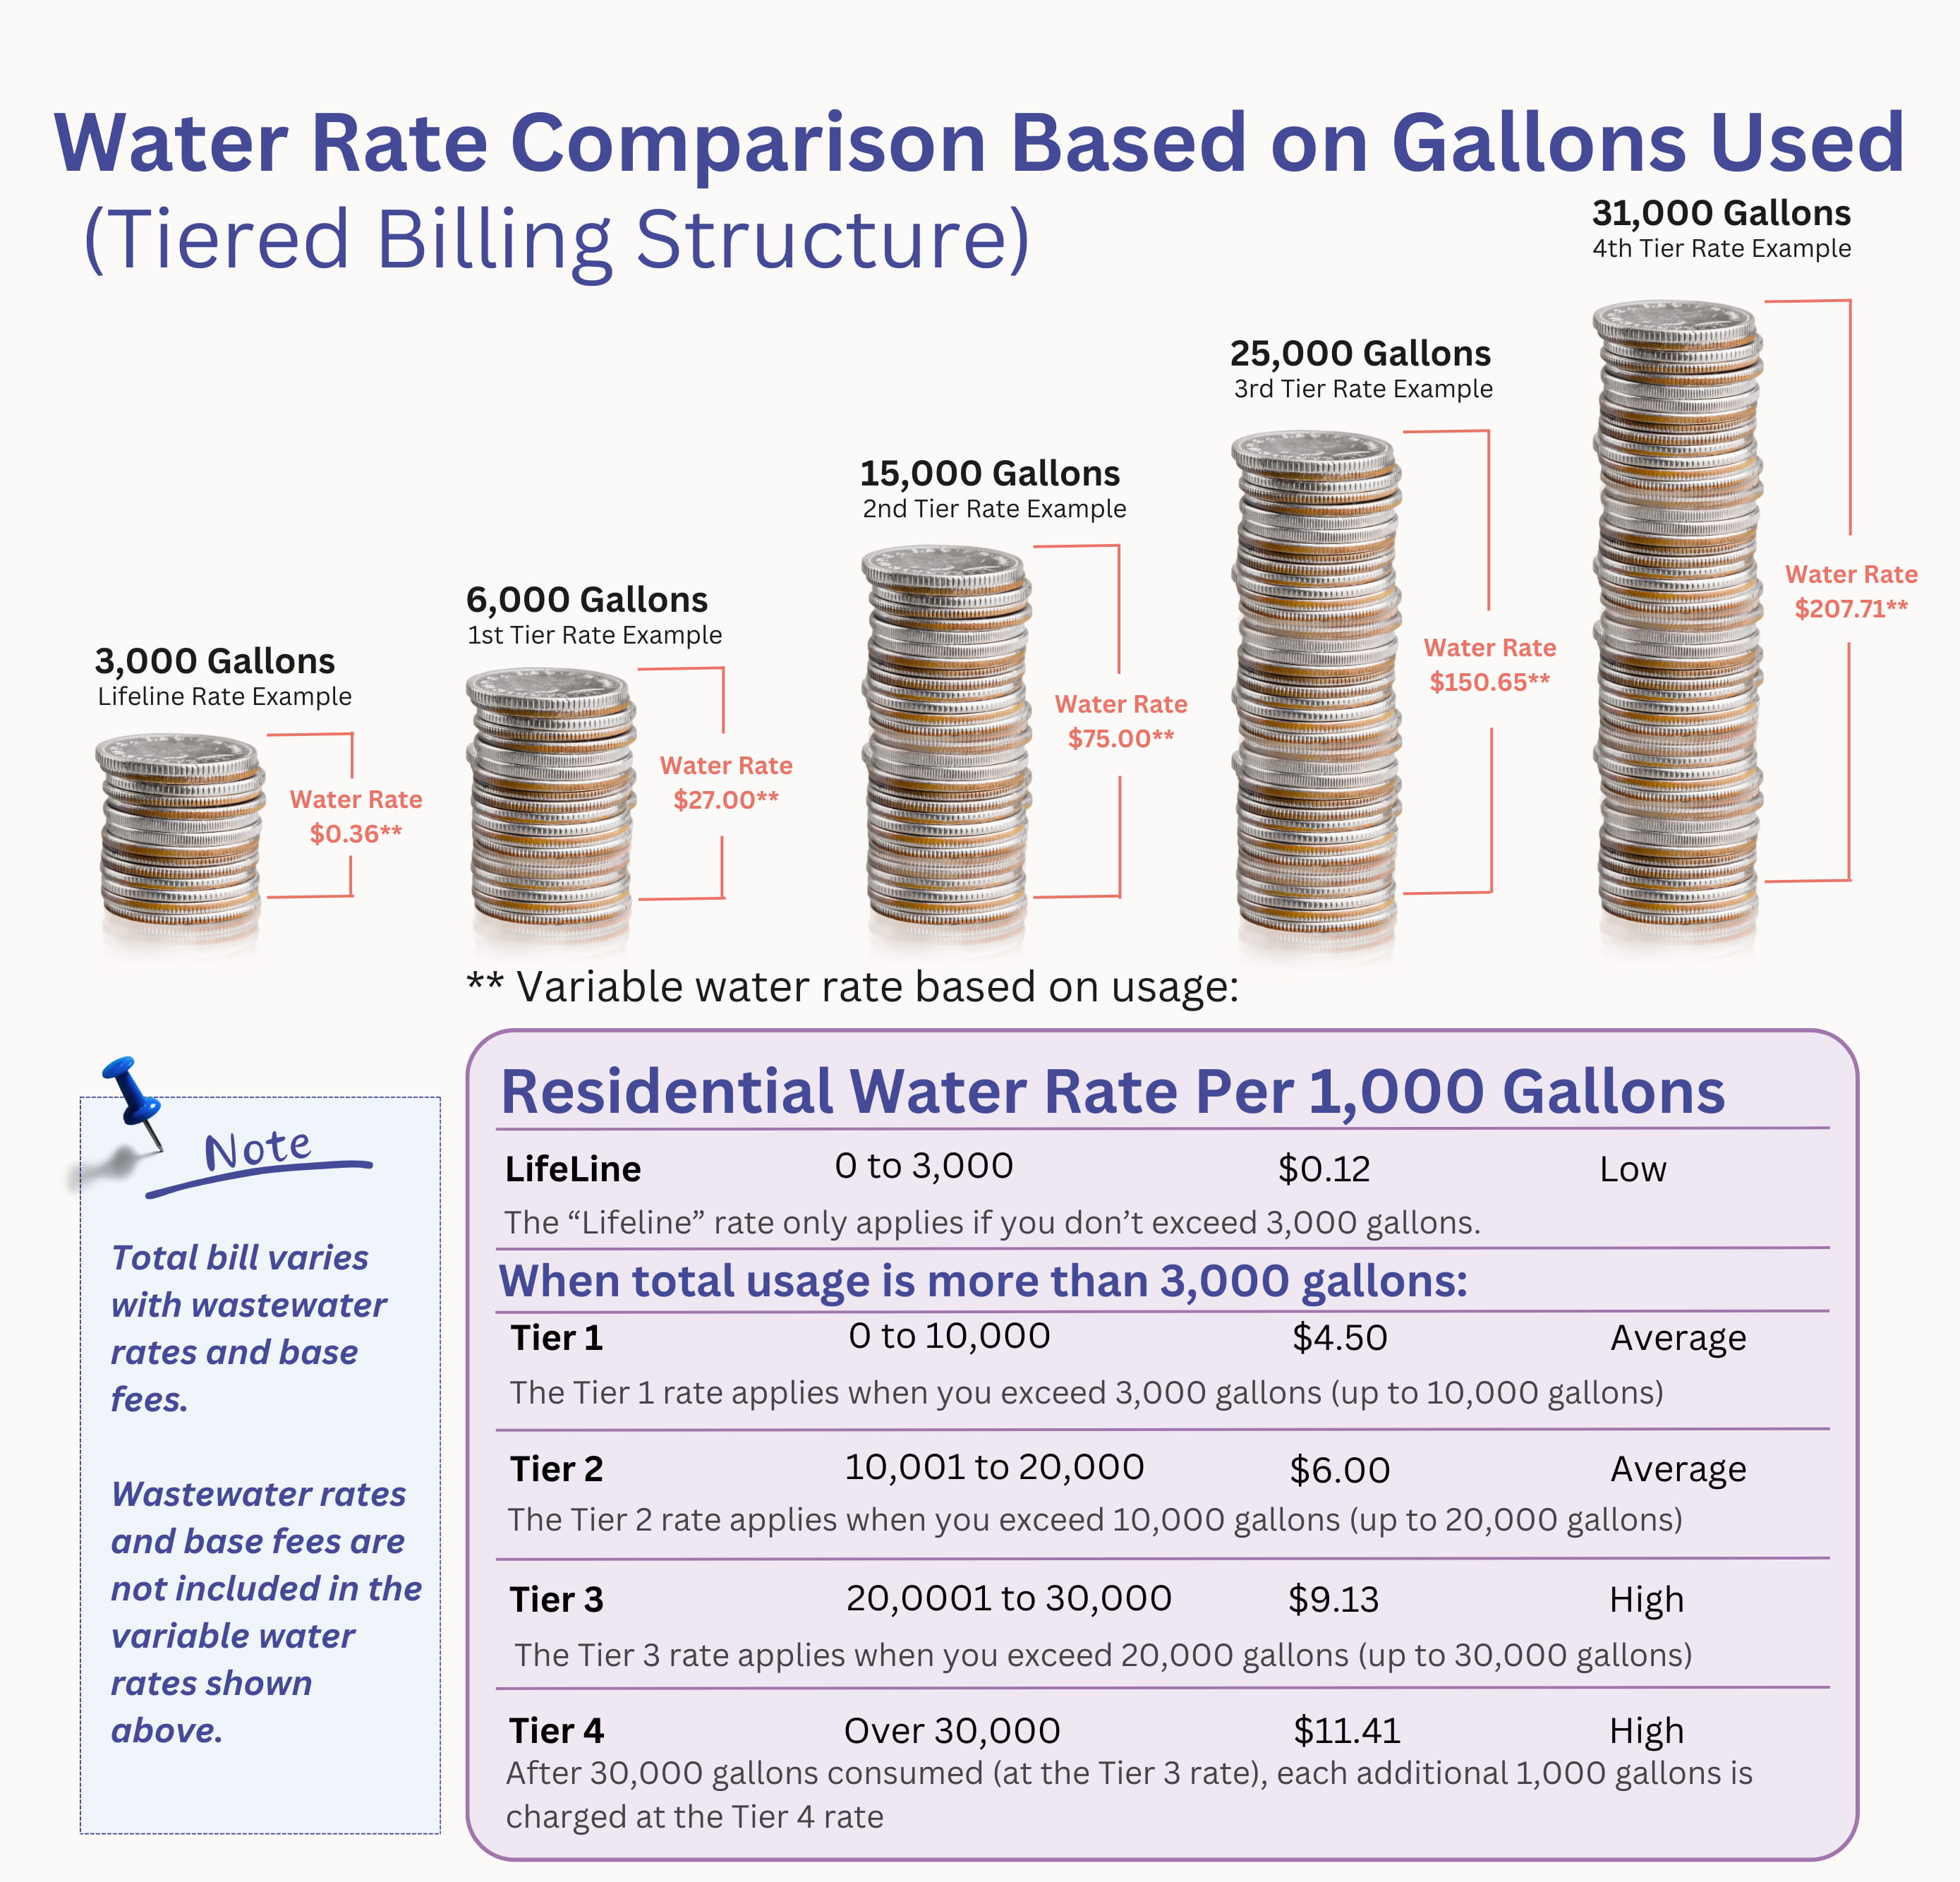 Water Rate Comparison Based on Gallons Used